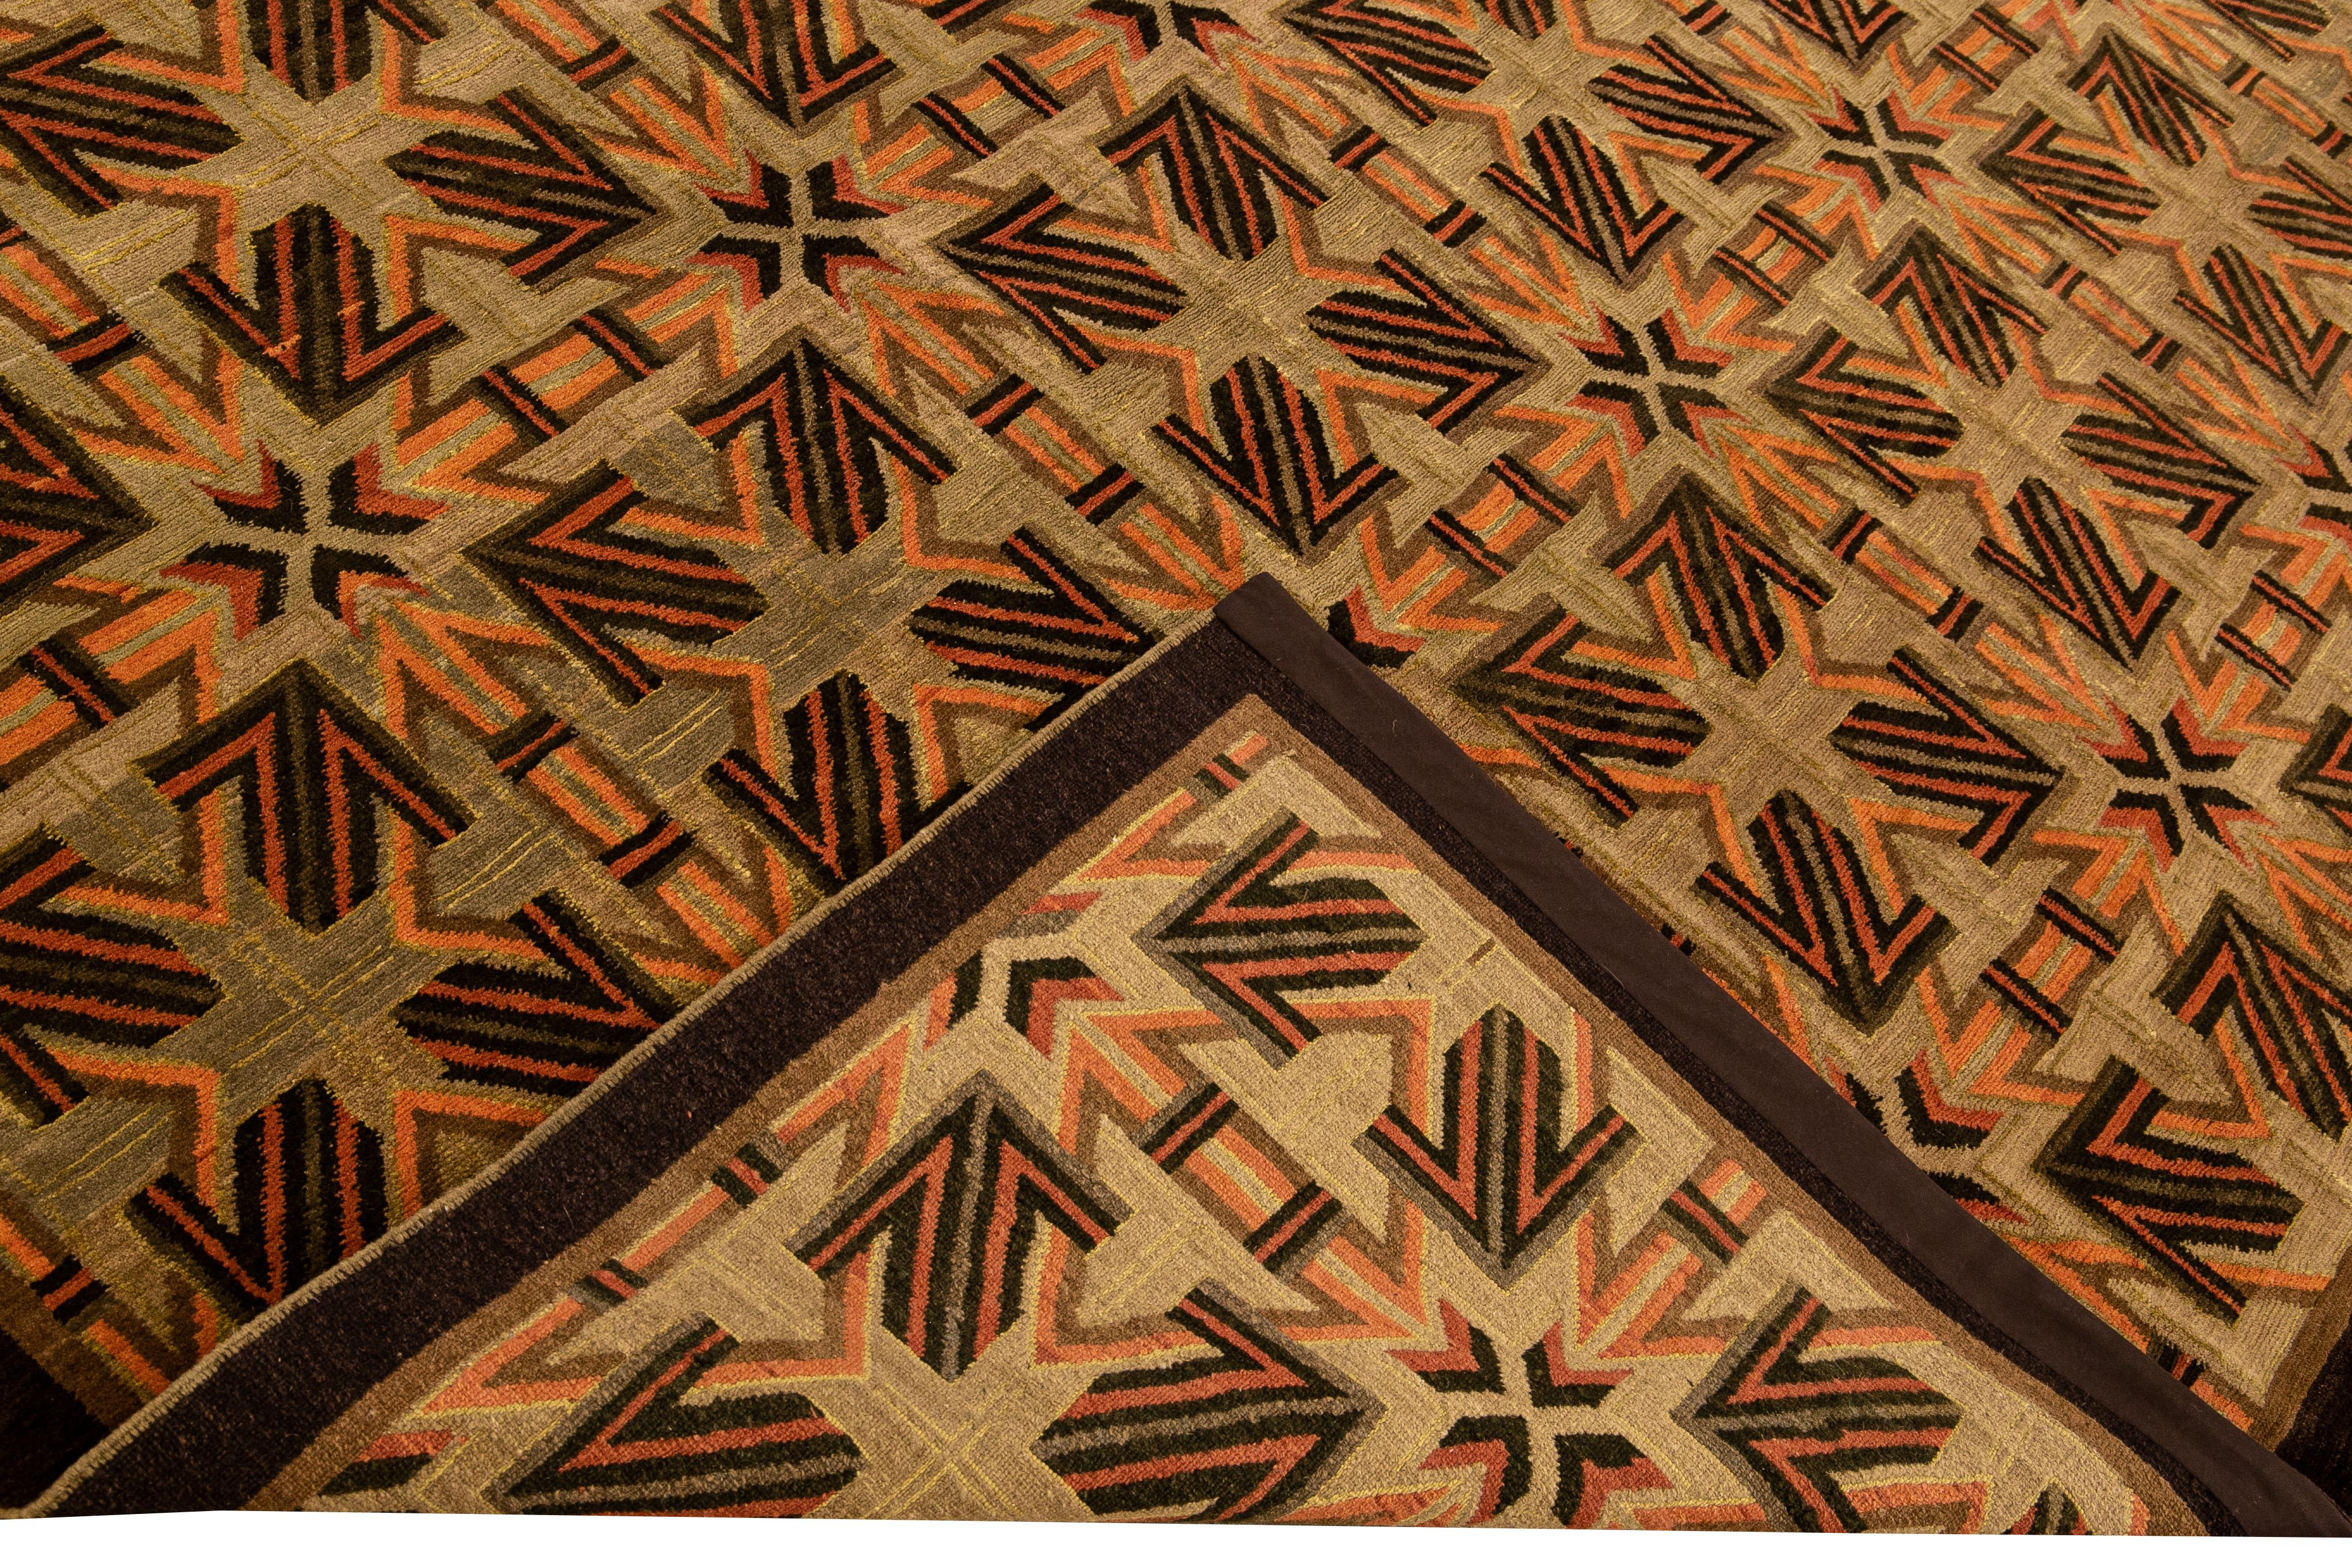 Beautiful modern Tibetan hand-knotted wool and silk rug with a brown field. This Tibetan rug has cooper, brown, and orange accents in a gorgeous all-over geometric abstract design.

This rug measures 9'3